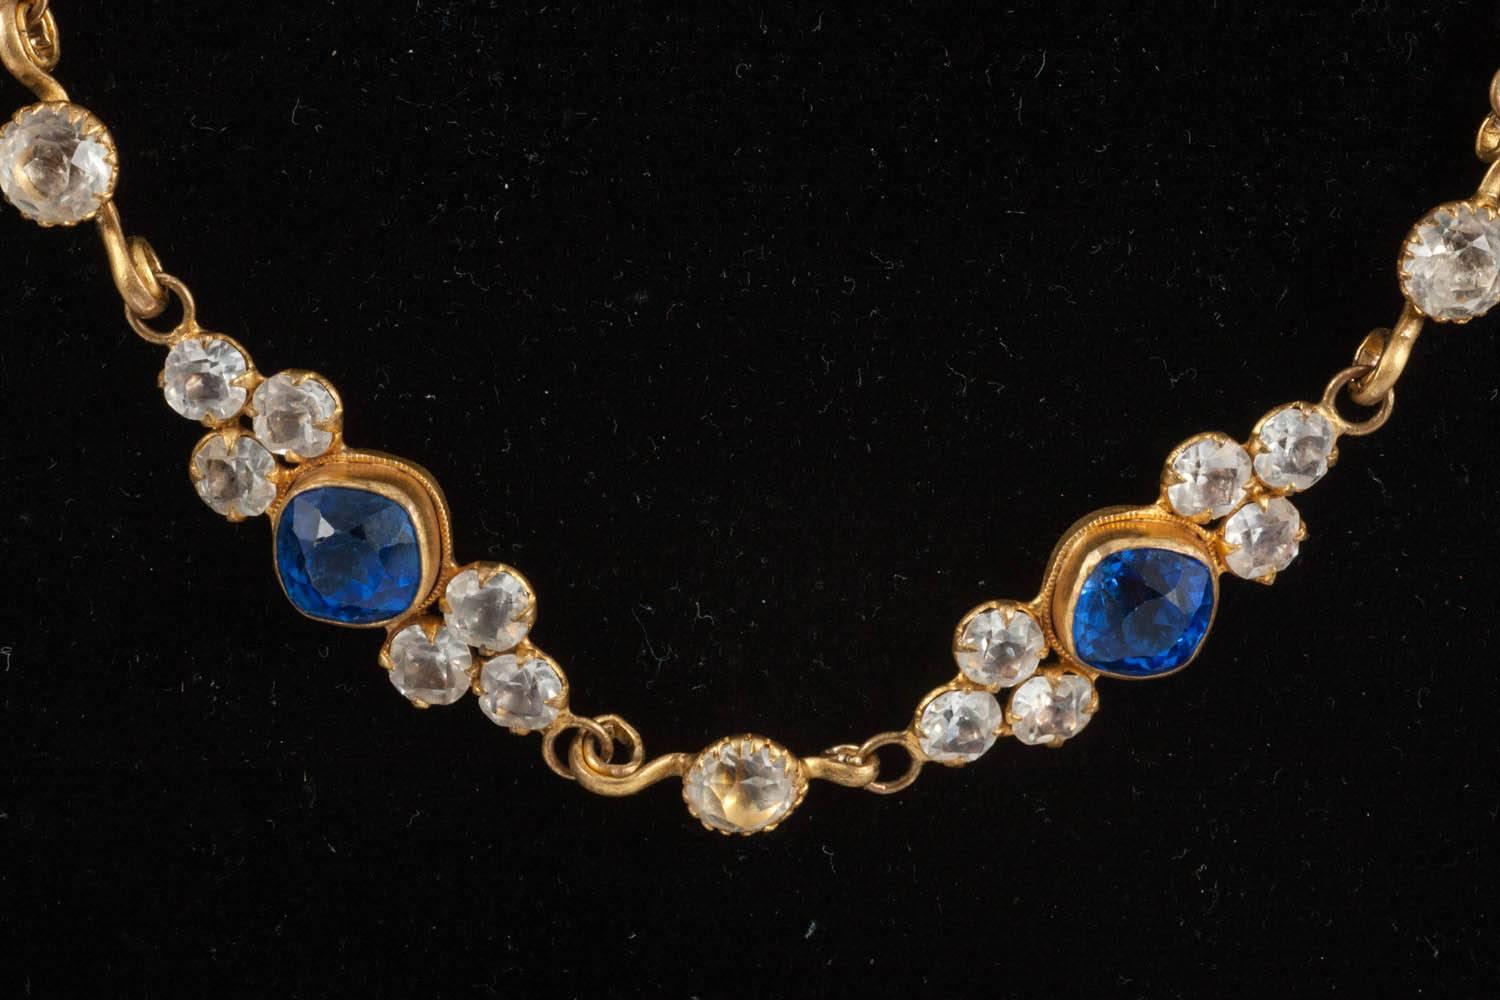 This is a stunning survival of French theatrical jewellery. The paste stones are clear and a most intense cornflower blue. The piece would have been designed for use with different pendants, or attaching to a costume, as it has two sturdy hooks at